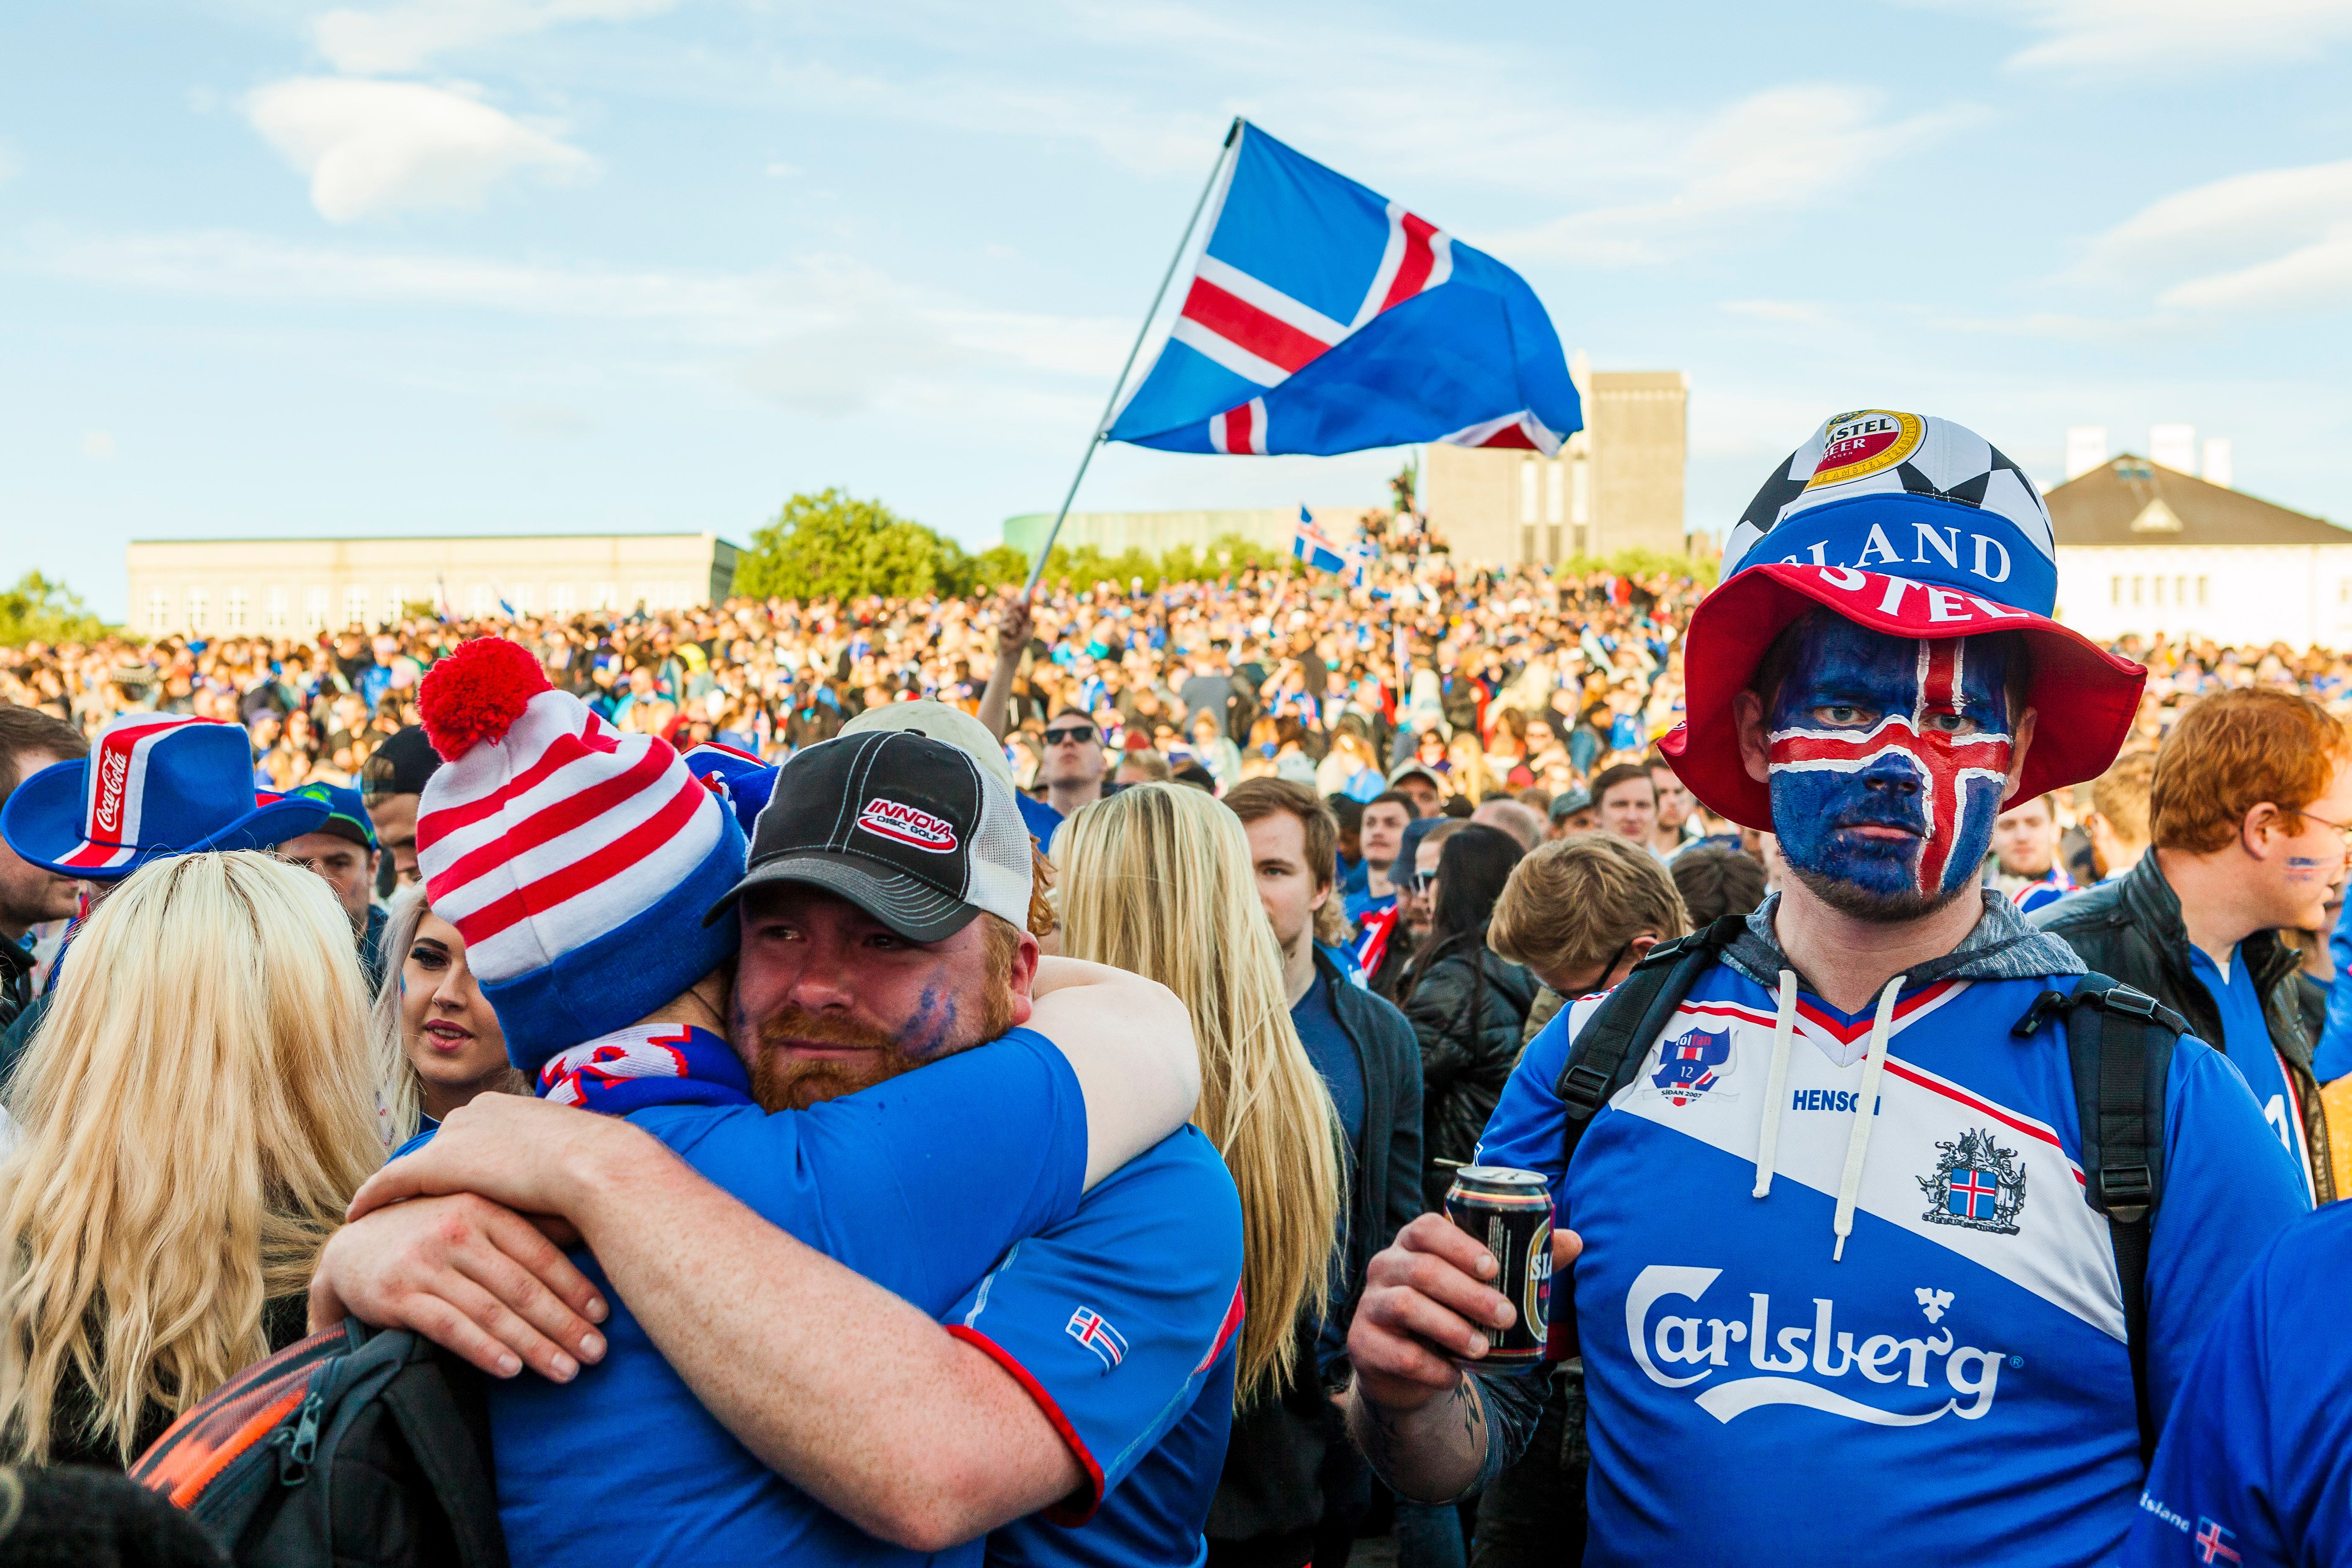 Iceland's fans react during the public screening of the quater final EURO 2016 football match against France, in Reykjavik, Iceland, on July 3, 2016.
The quarter final match played in Saint-Denis, near Paris. Iceland lost against France 2-5. / AFP / Karl Petersson        (Photo credit should read KARL PETERSSON/AFP/Getty Images)